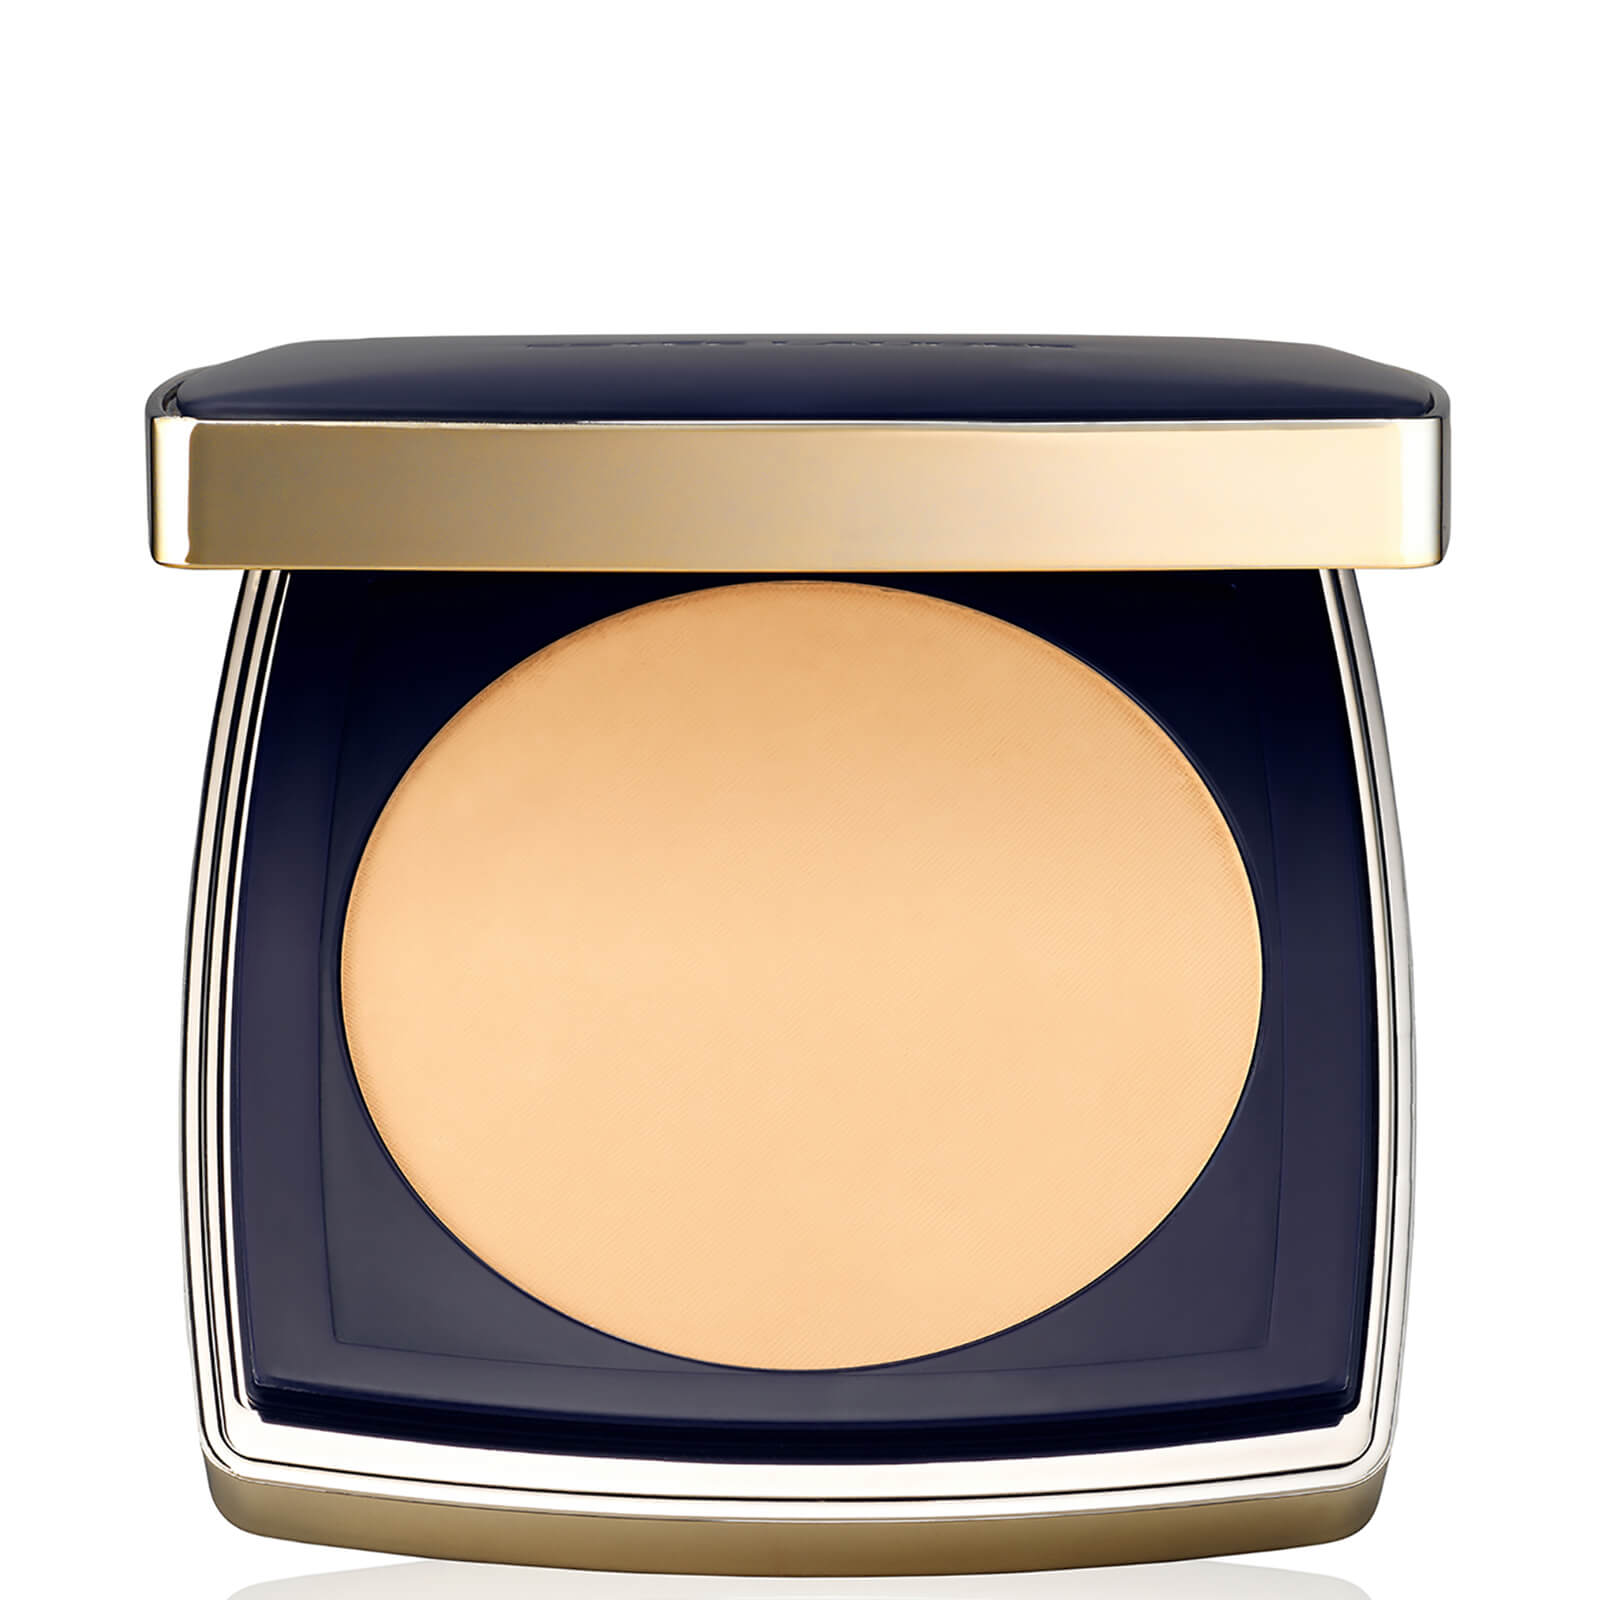 Estée Lauder Double Wear Stay-in-place Matte Powder Foundation Spf10 12g (various Shades) - 2w1.5 Na In Neutrals